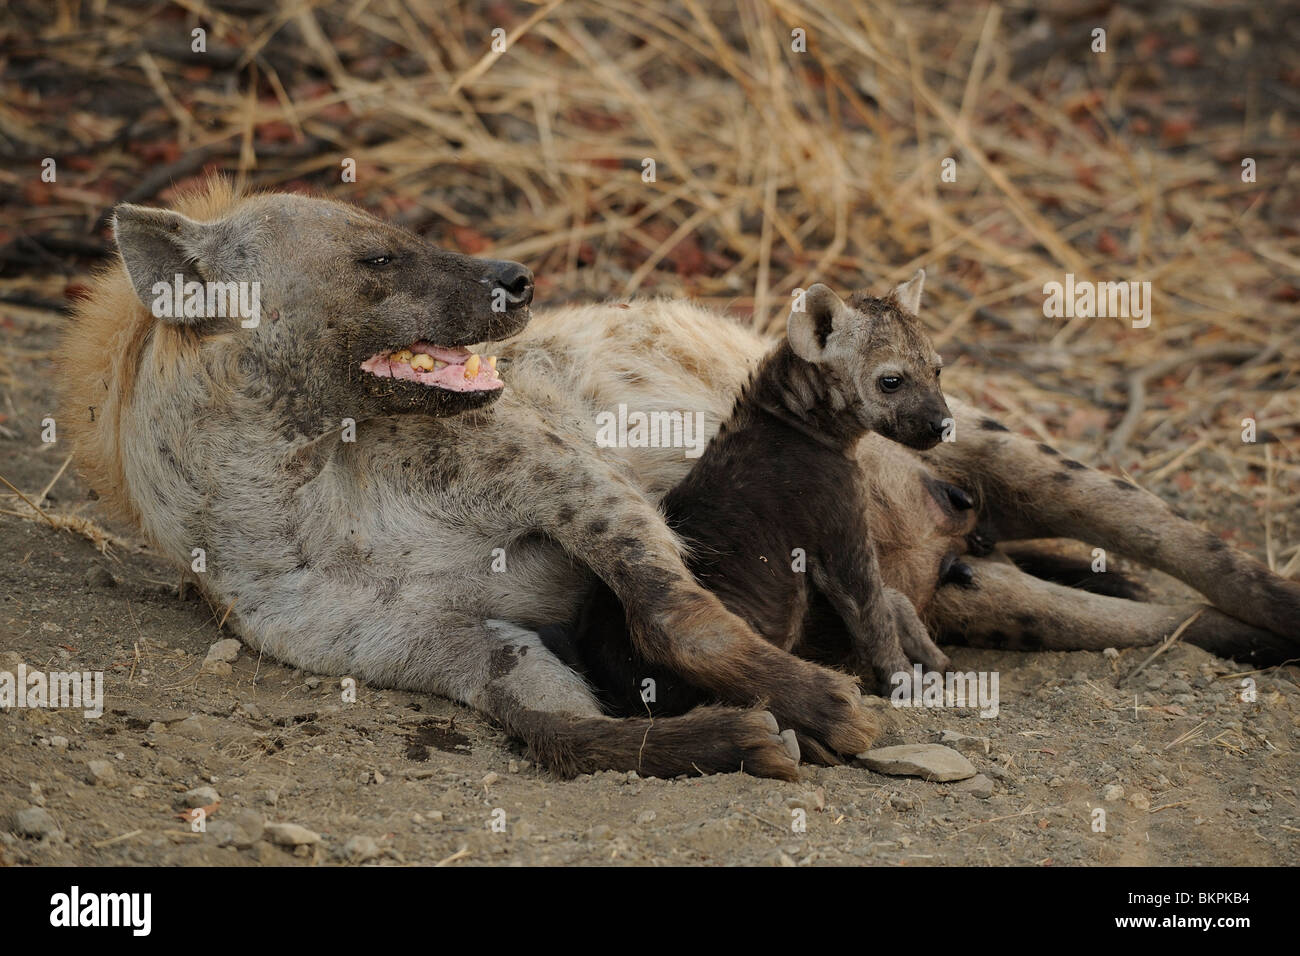 Spotted Hyena (Crocuta crocuta) mother with cub lying in sand Stock Photo